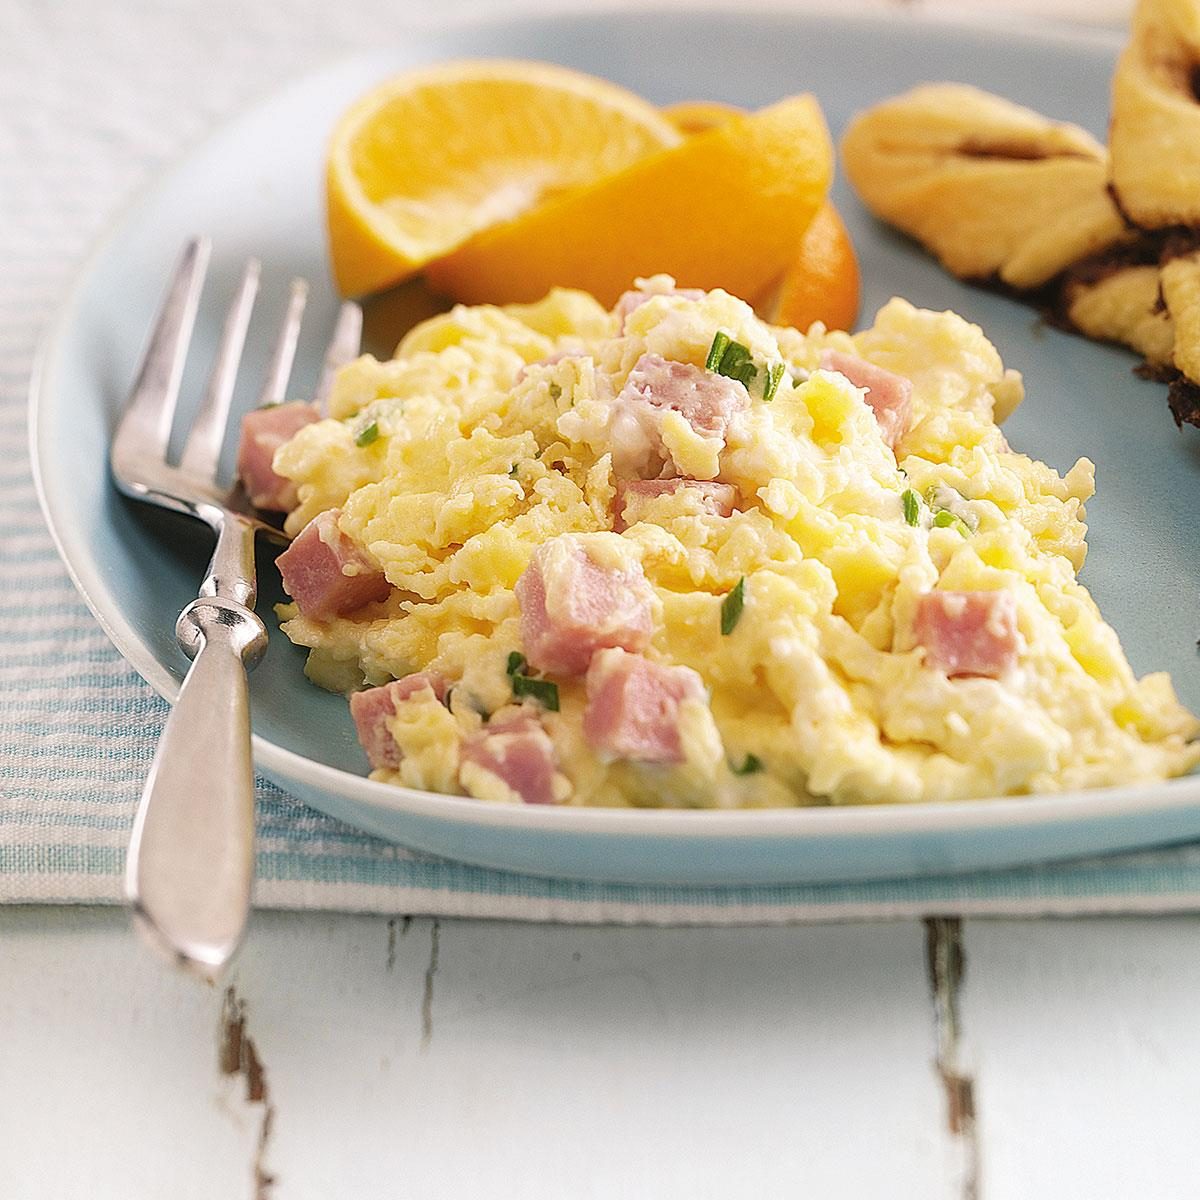 Best-Ever Creamy Scrambled Eggs - How To Make Creamy Scrambled Eggs